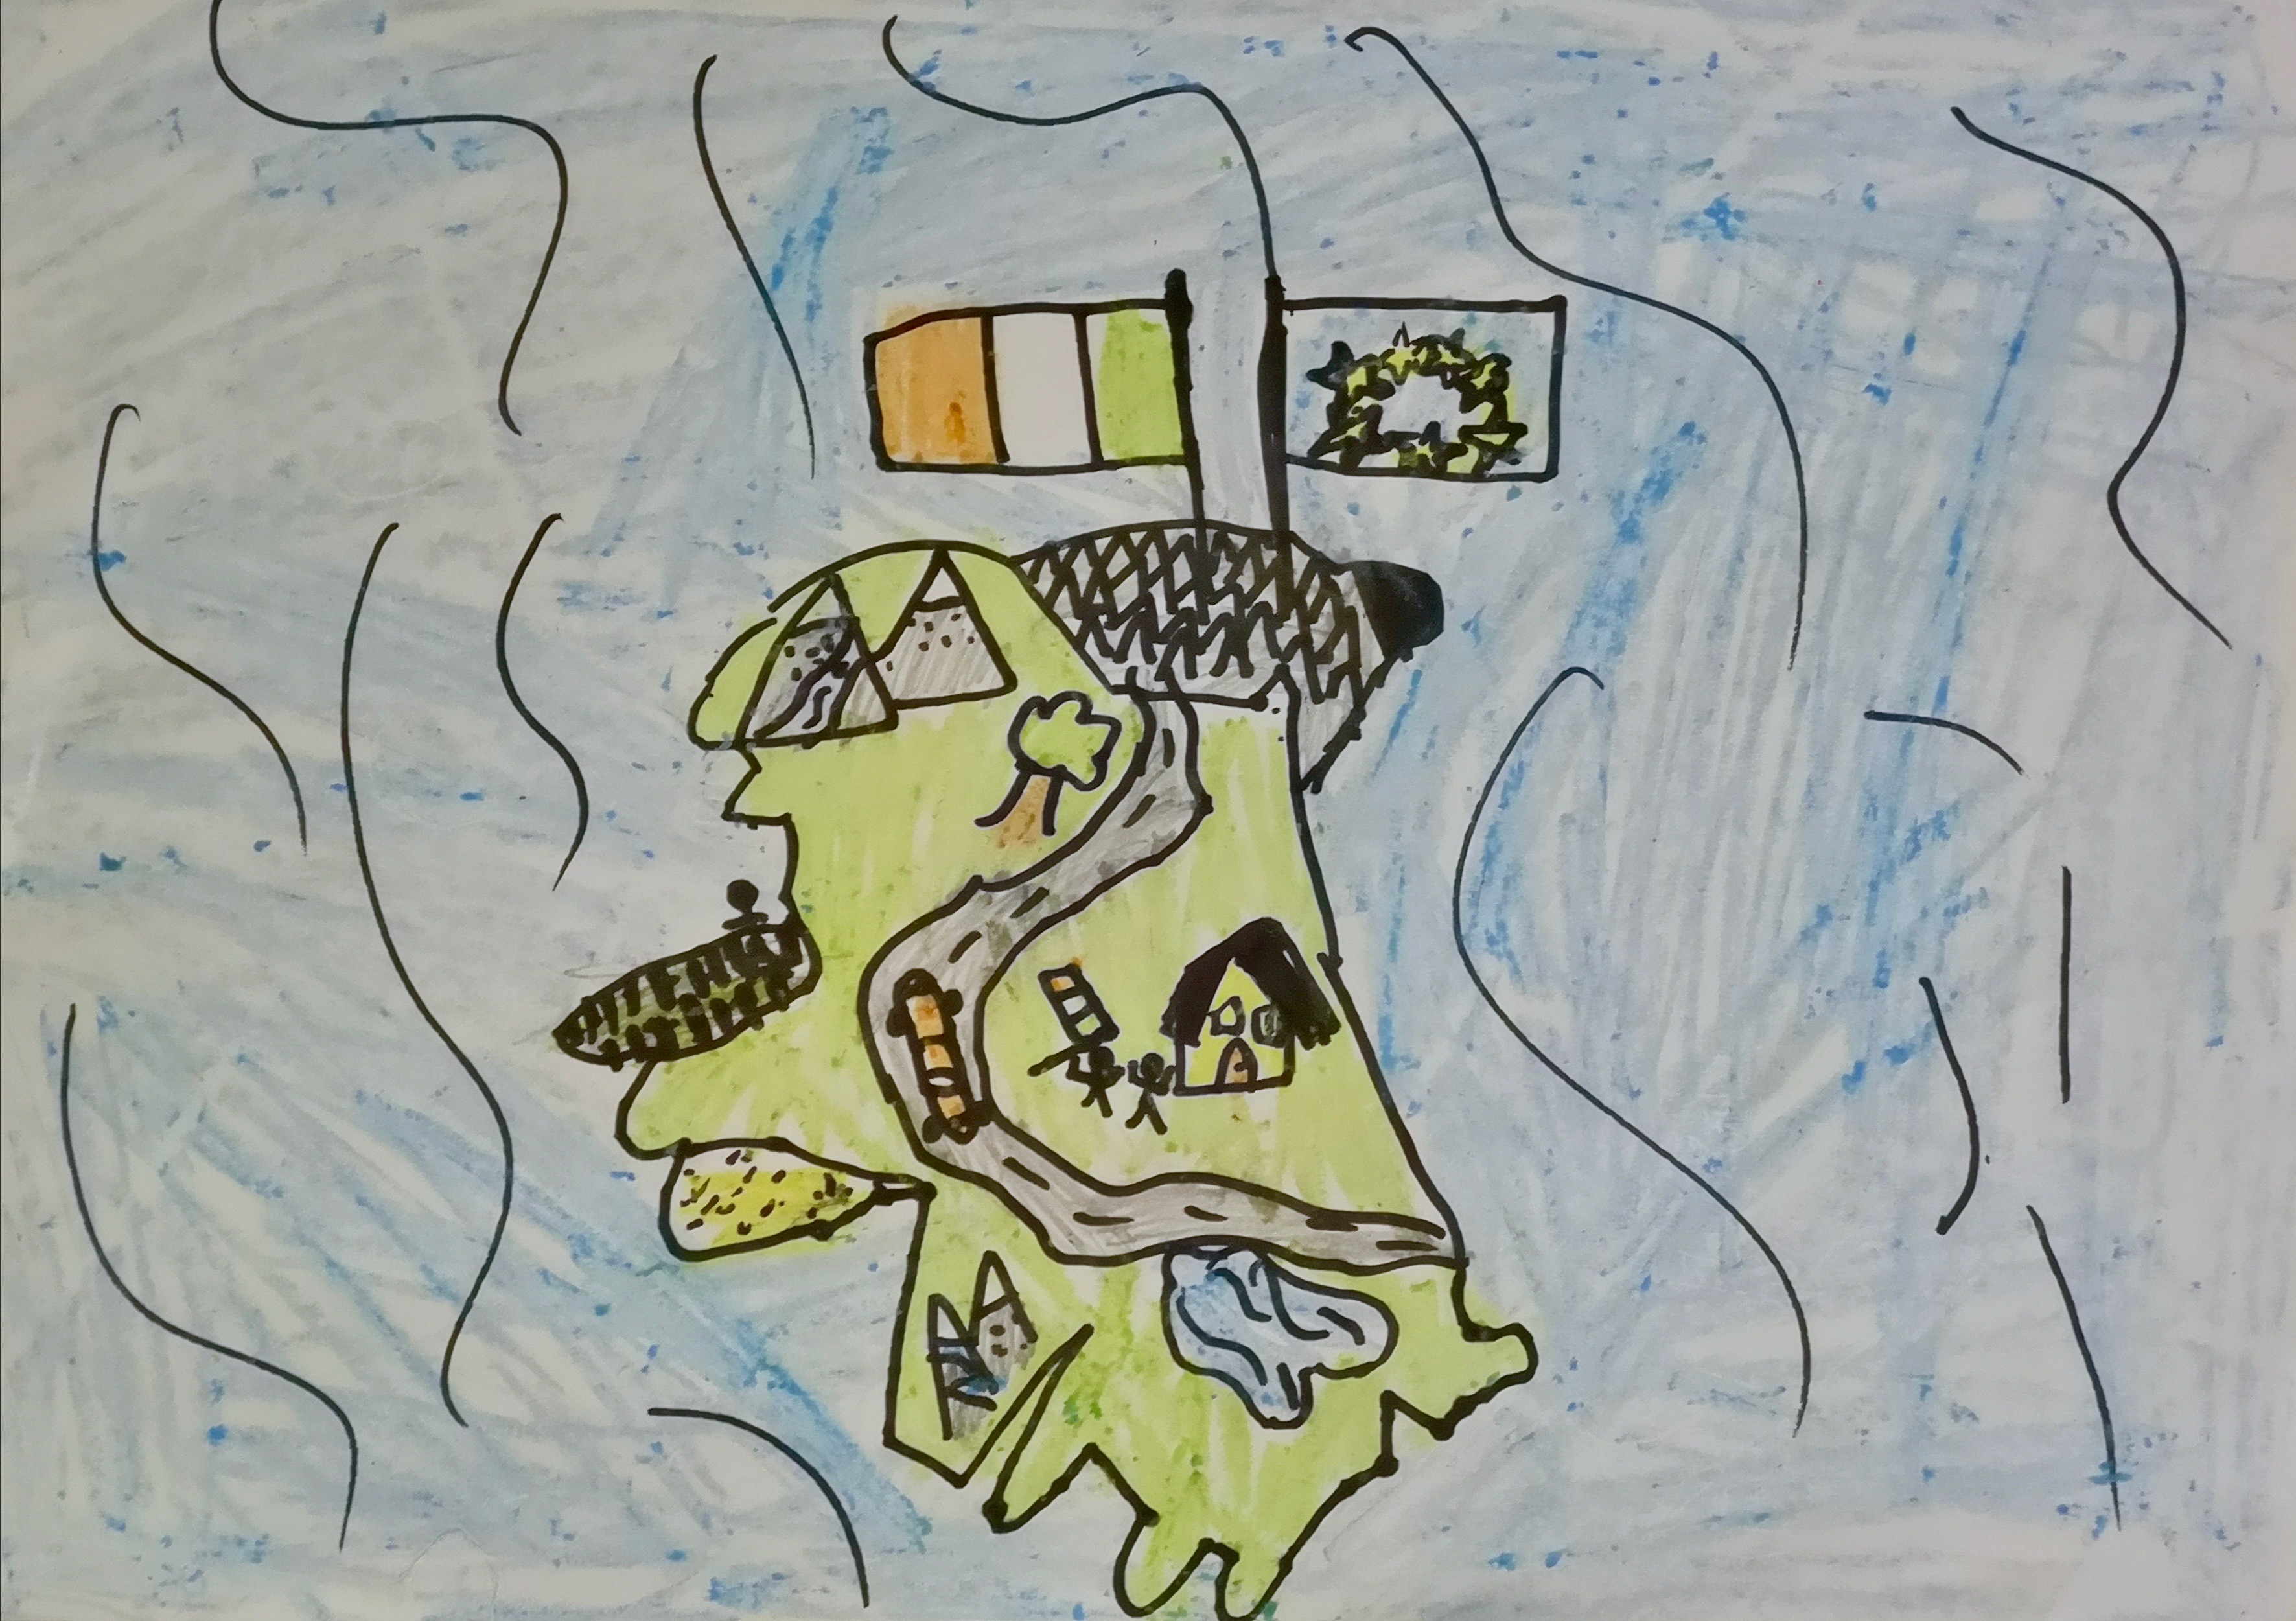 'This is Ireland' by Liadain (8) from Wicklow